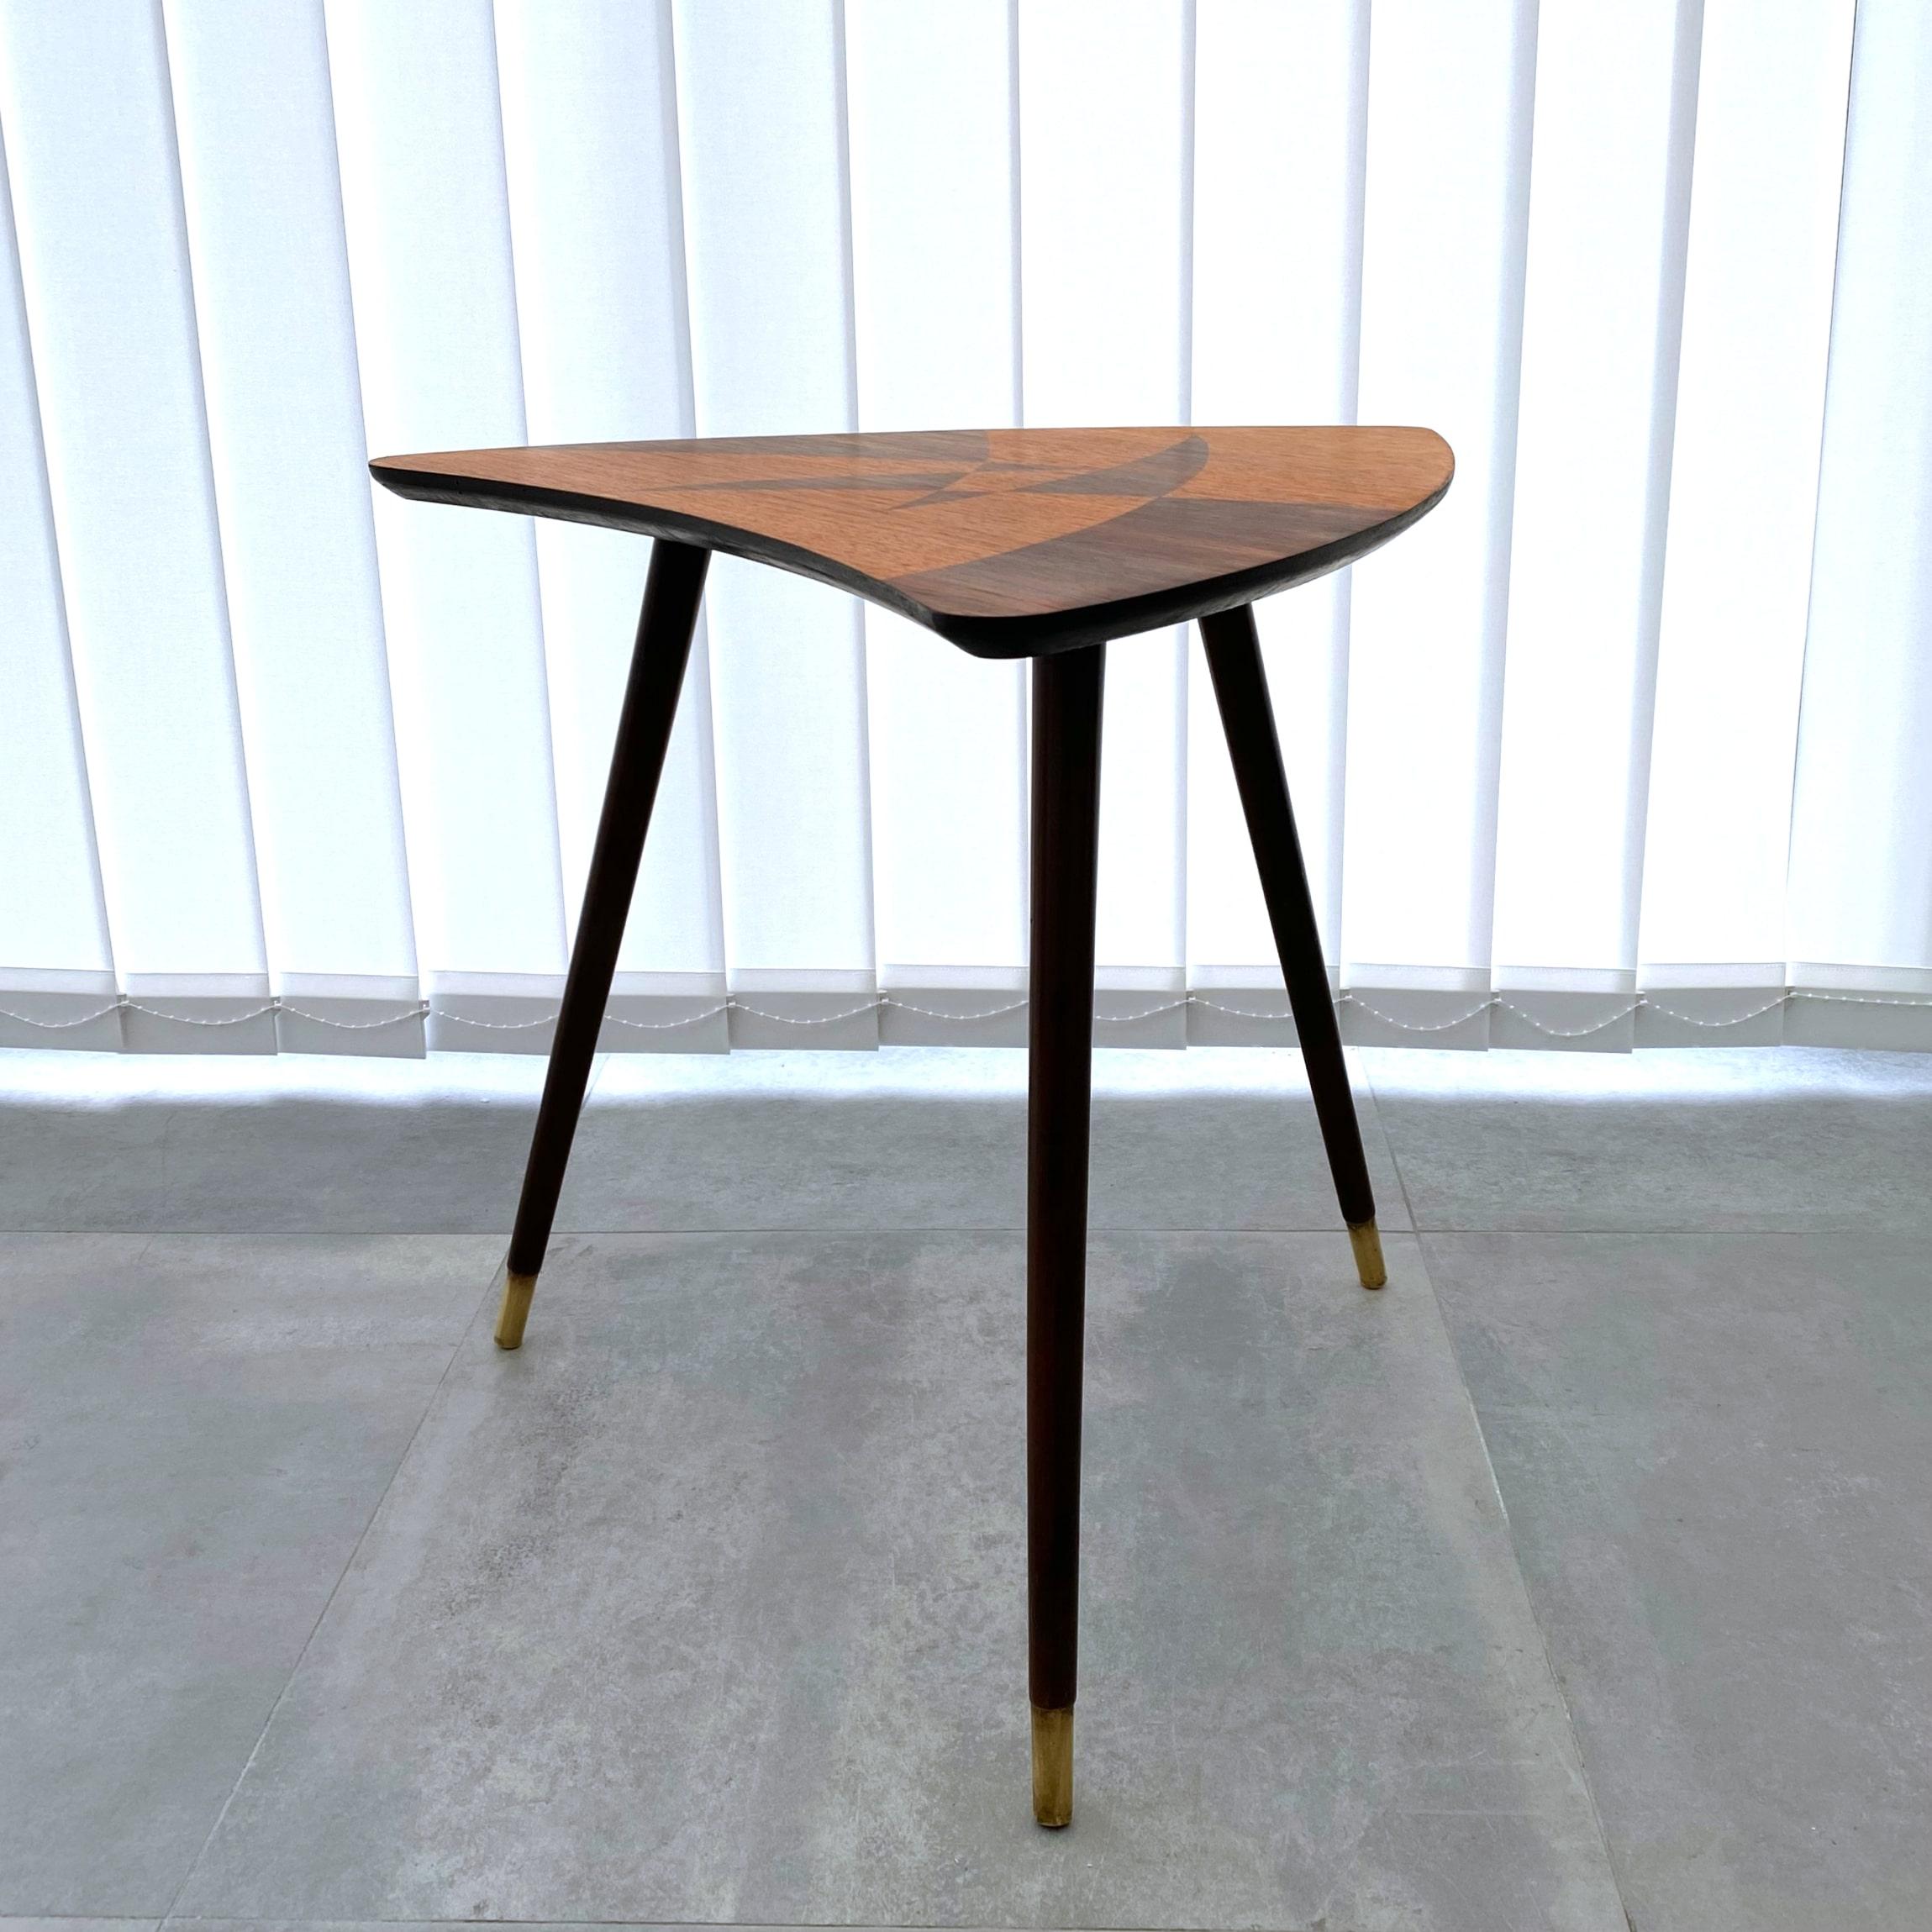 Swedish Scandinavian mid-century side table with geometric wooden inlays, Sweden, 1950s For Sale